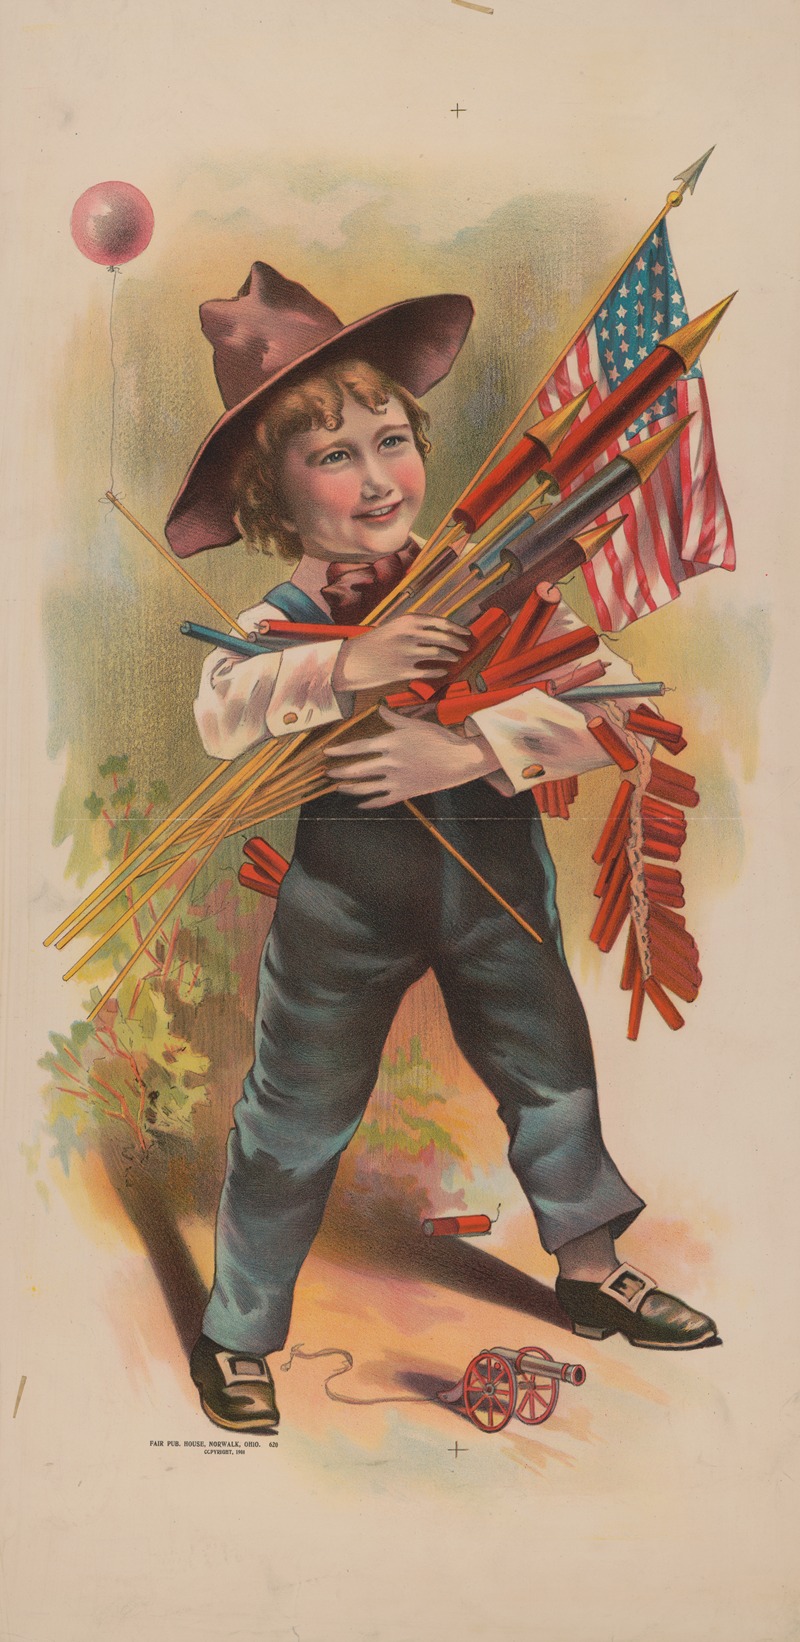 Fair Pub. House - Boy with fireworks, balloon, and toy cannon